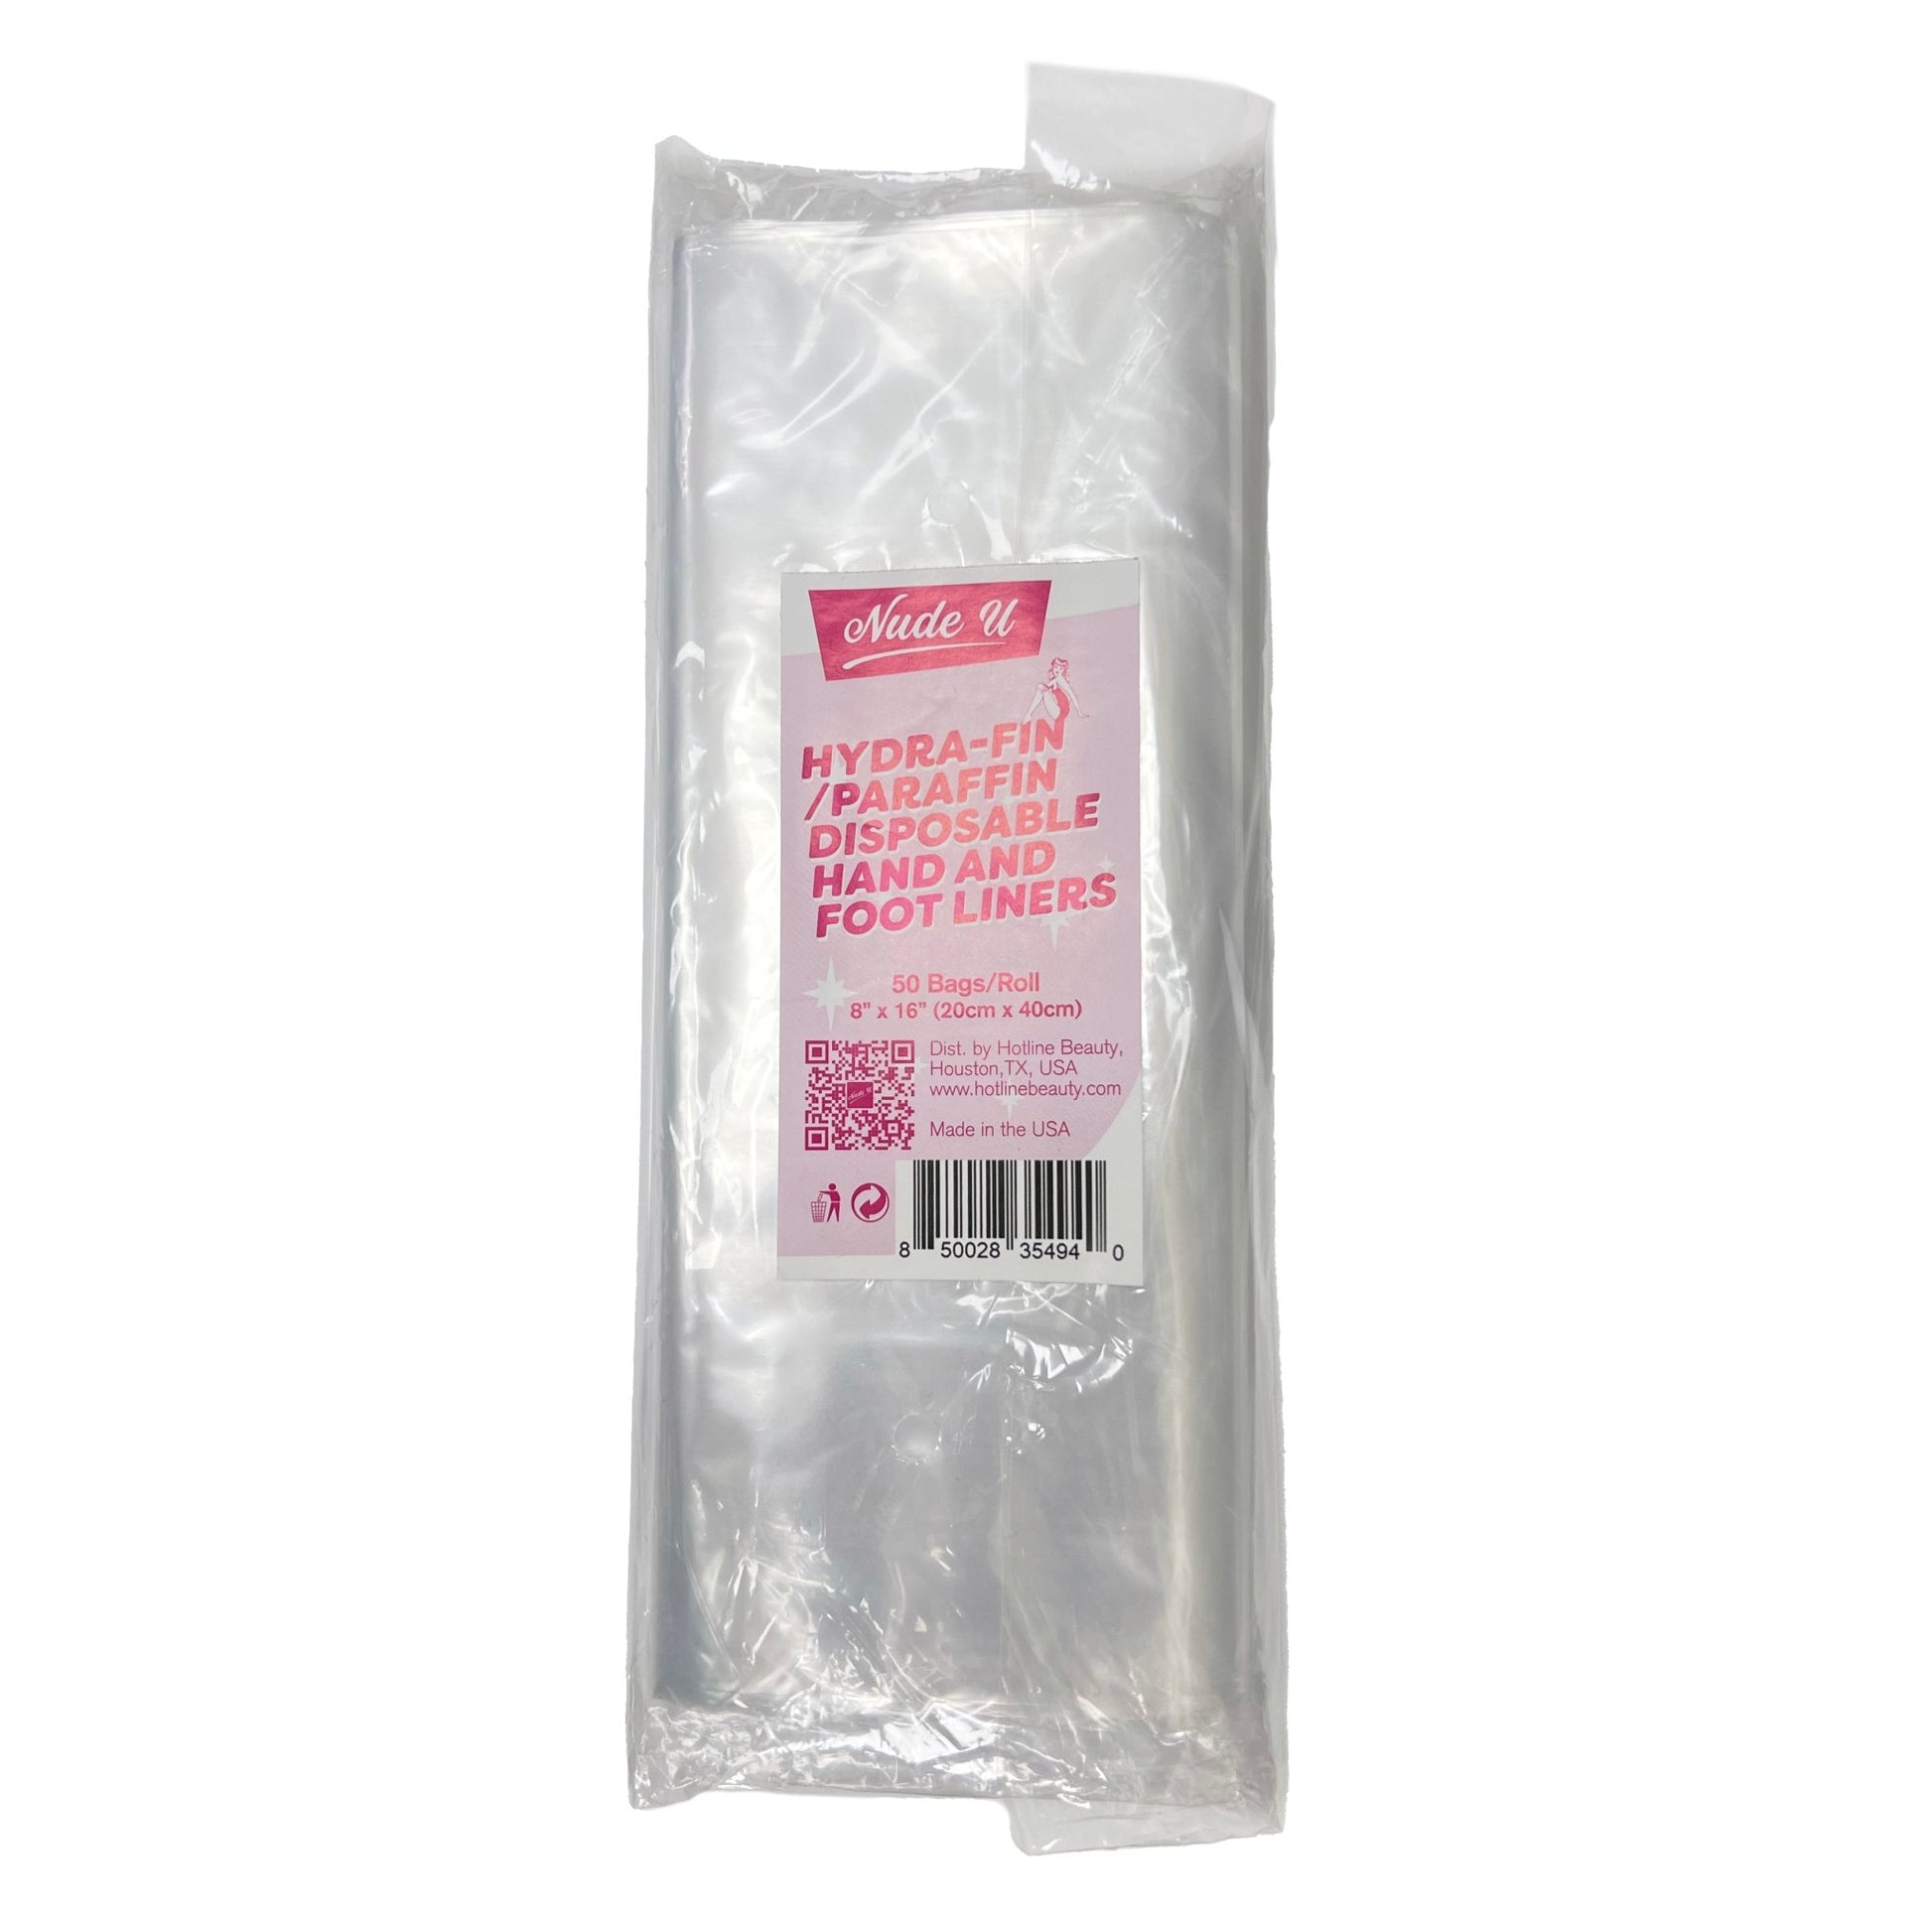 Hydra-Fin / Paraffin Disposable Hand and Foot Liners | NUDE U - SH Salons